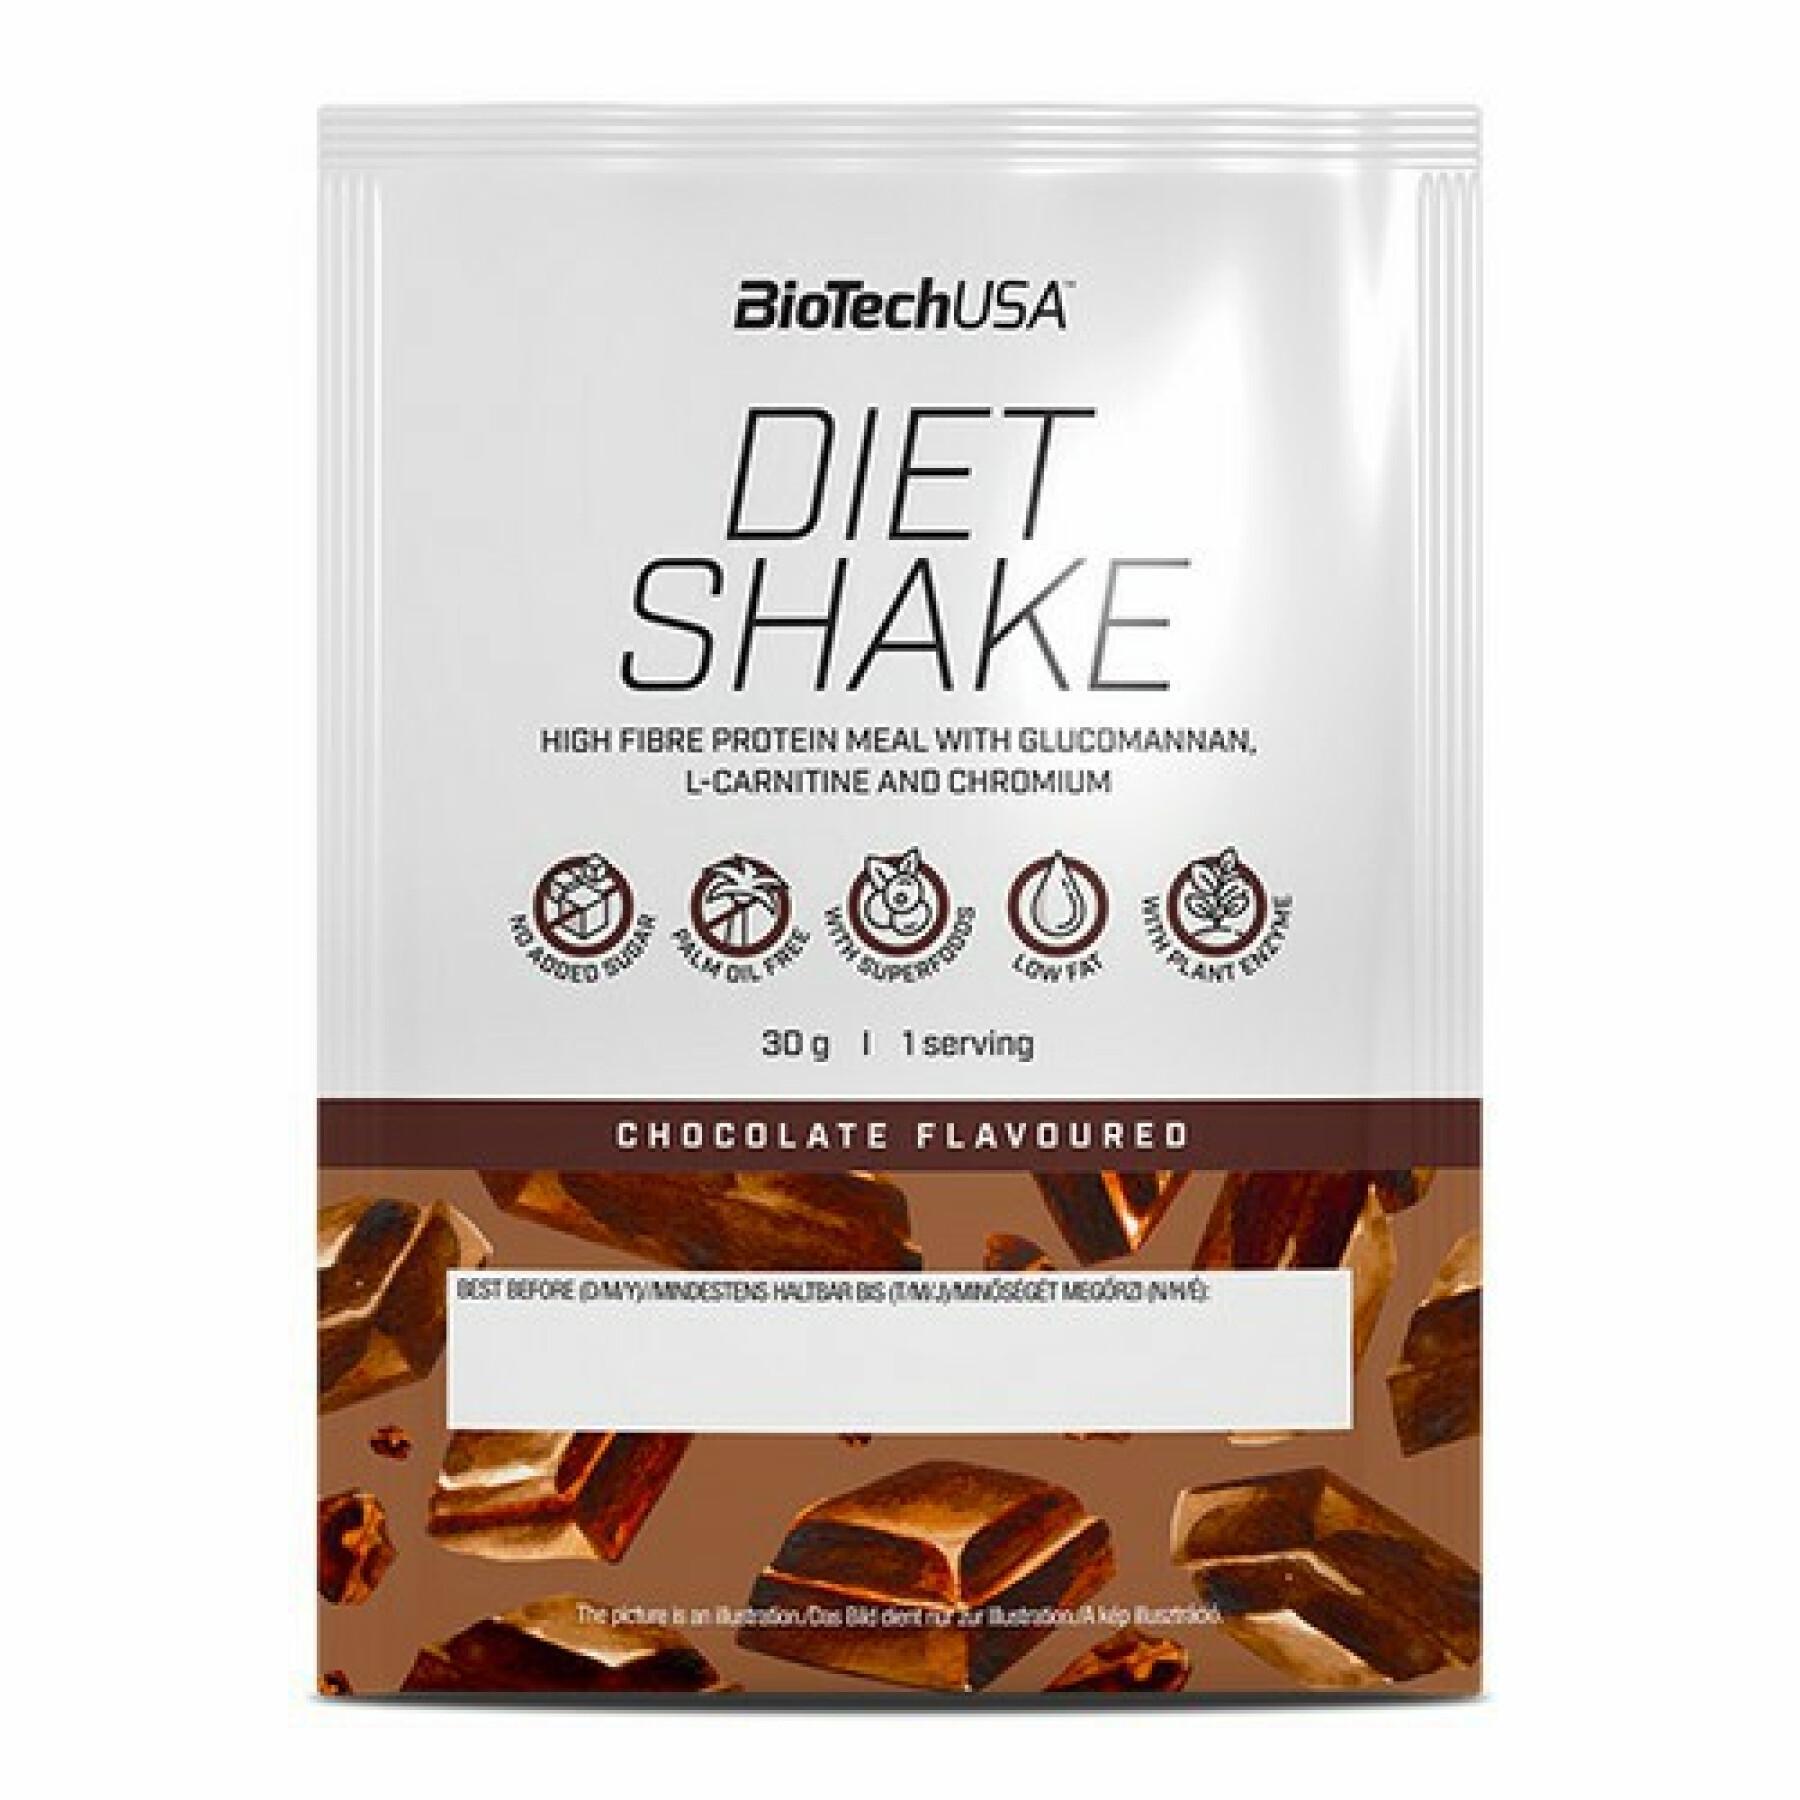 Batch of 50 bags of proteins Biotech USA diet shake - Chocolate - 30g